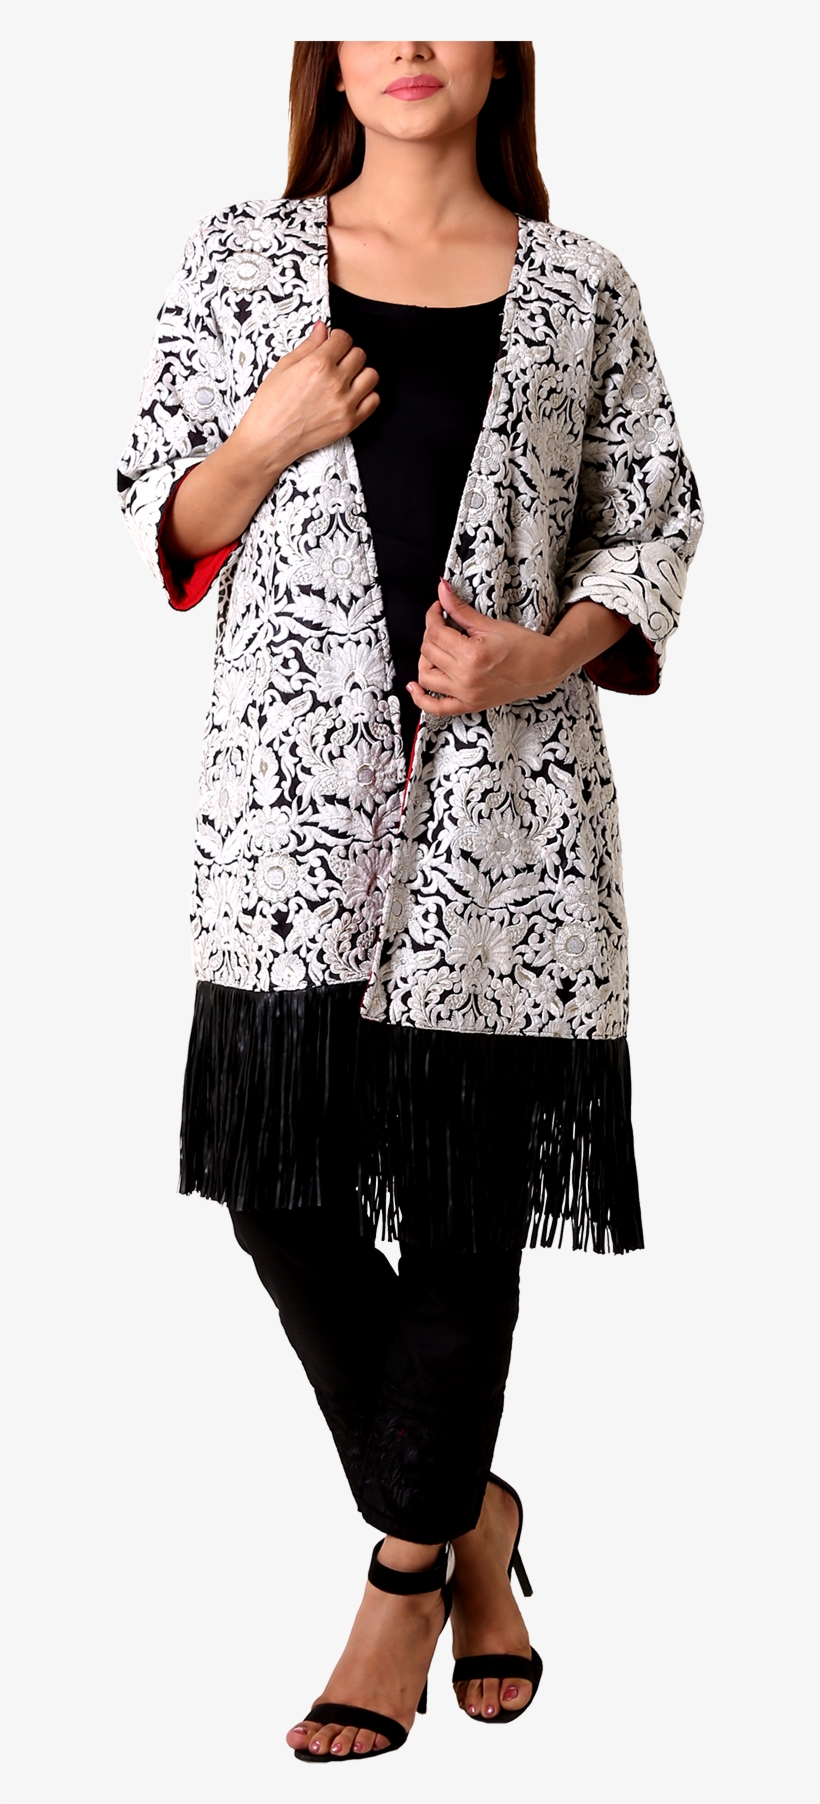 The Royal Coat Black & White Embroidered Gaara Cotton - Photo Shoot, transparent png #8920616